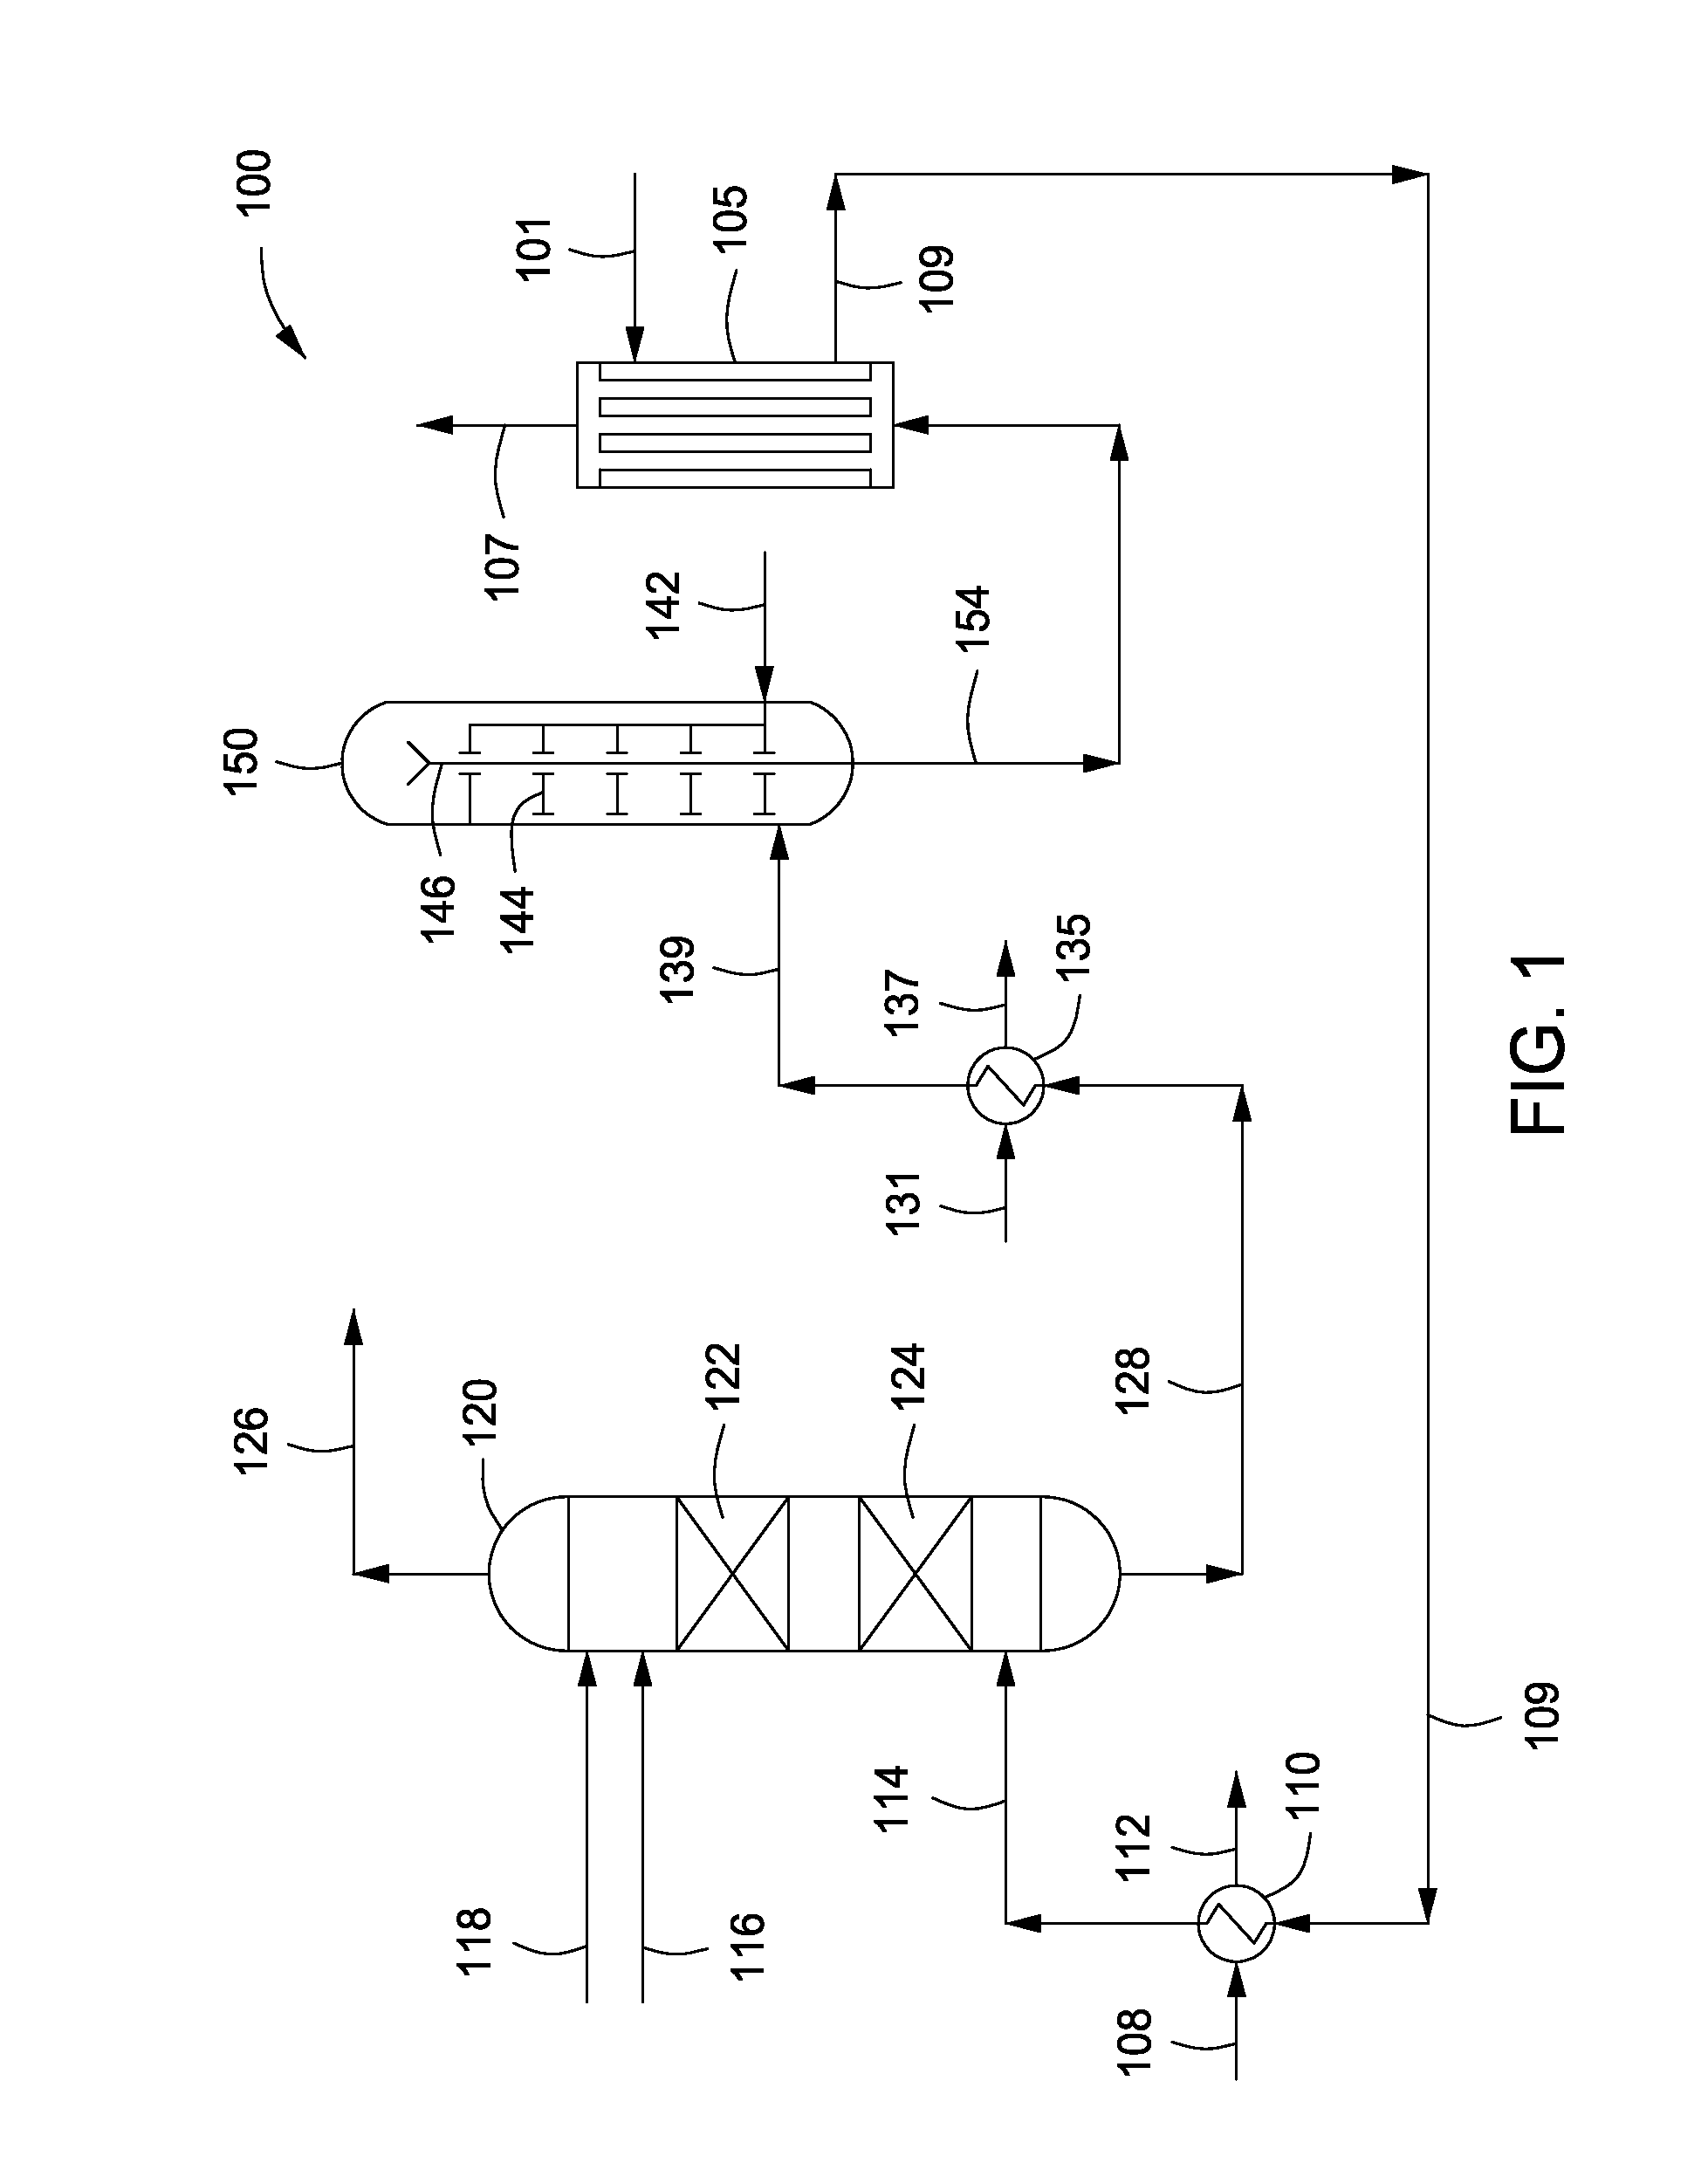 Systems and methods for integrated ammonia-urea process